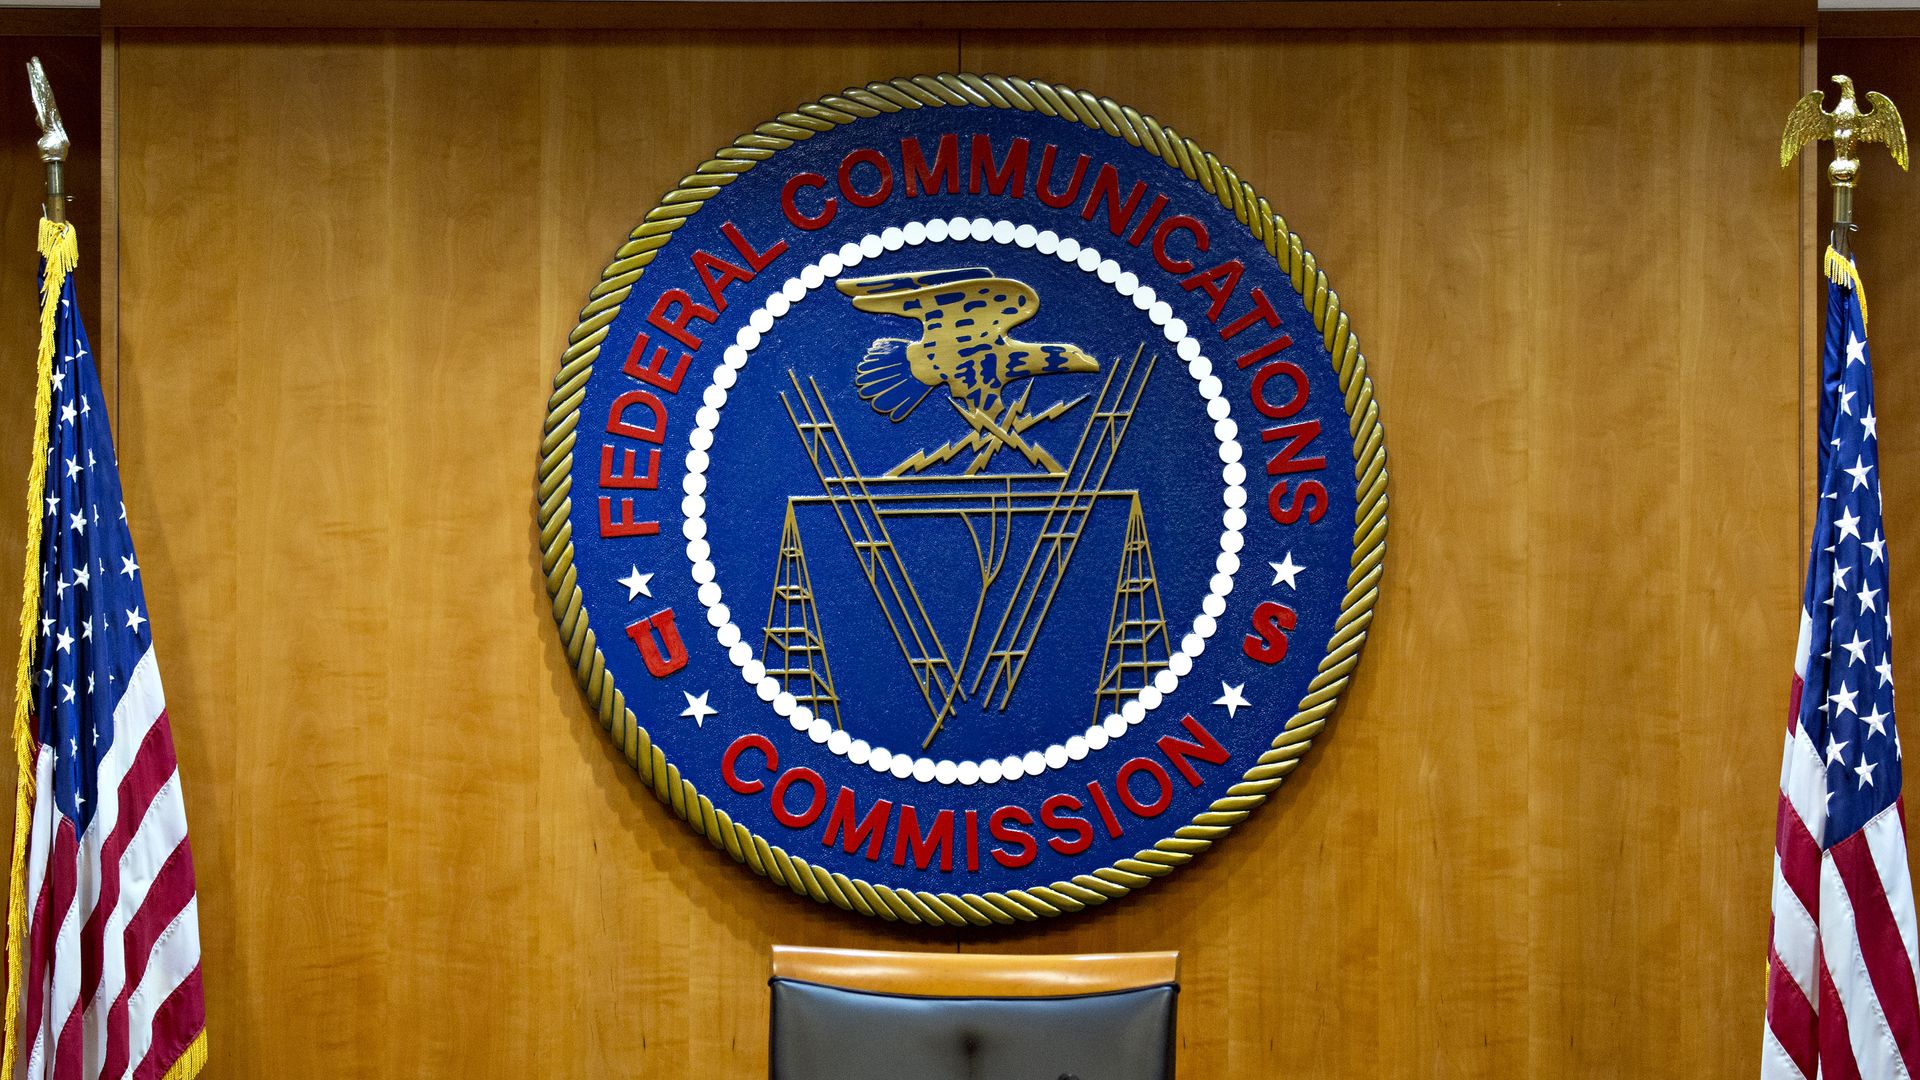 Photo of a large blue and red seal that says "Federal Communications Commission"